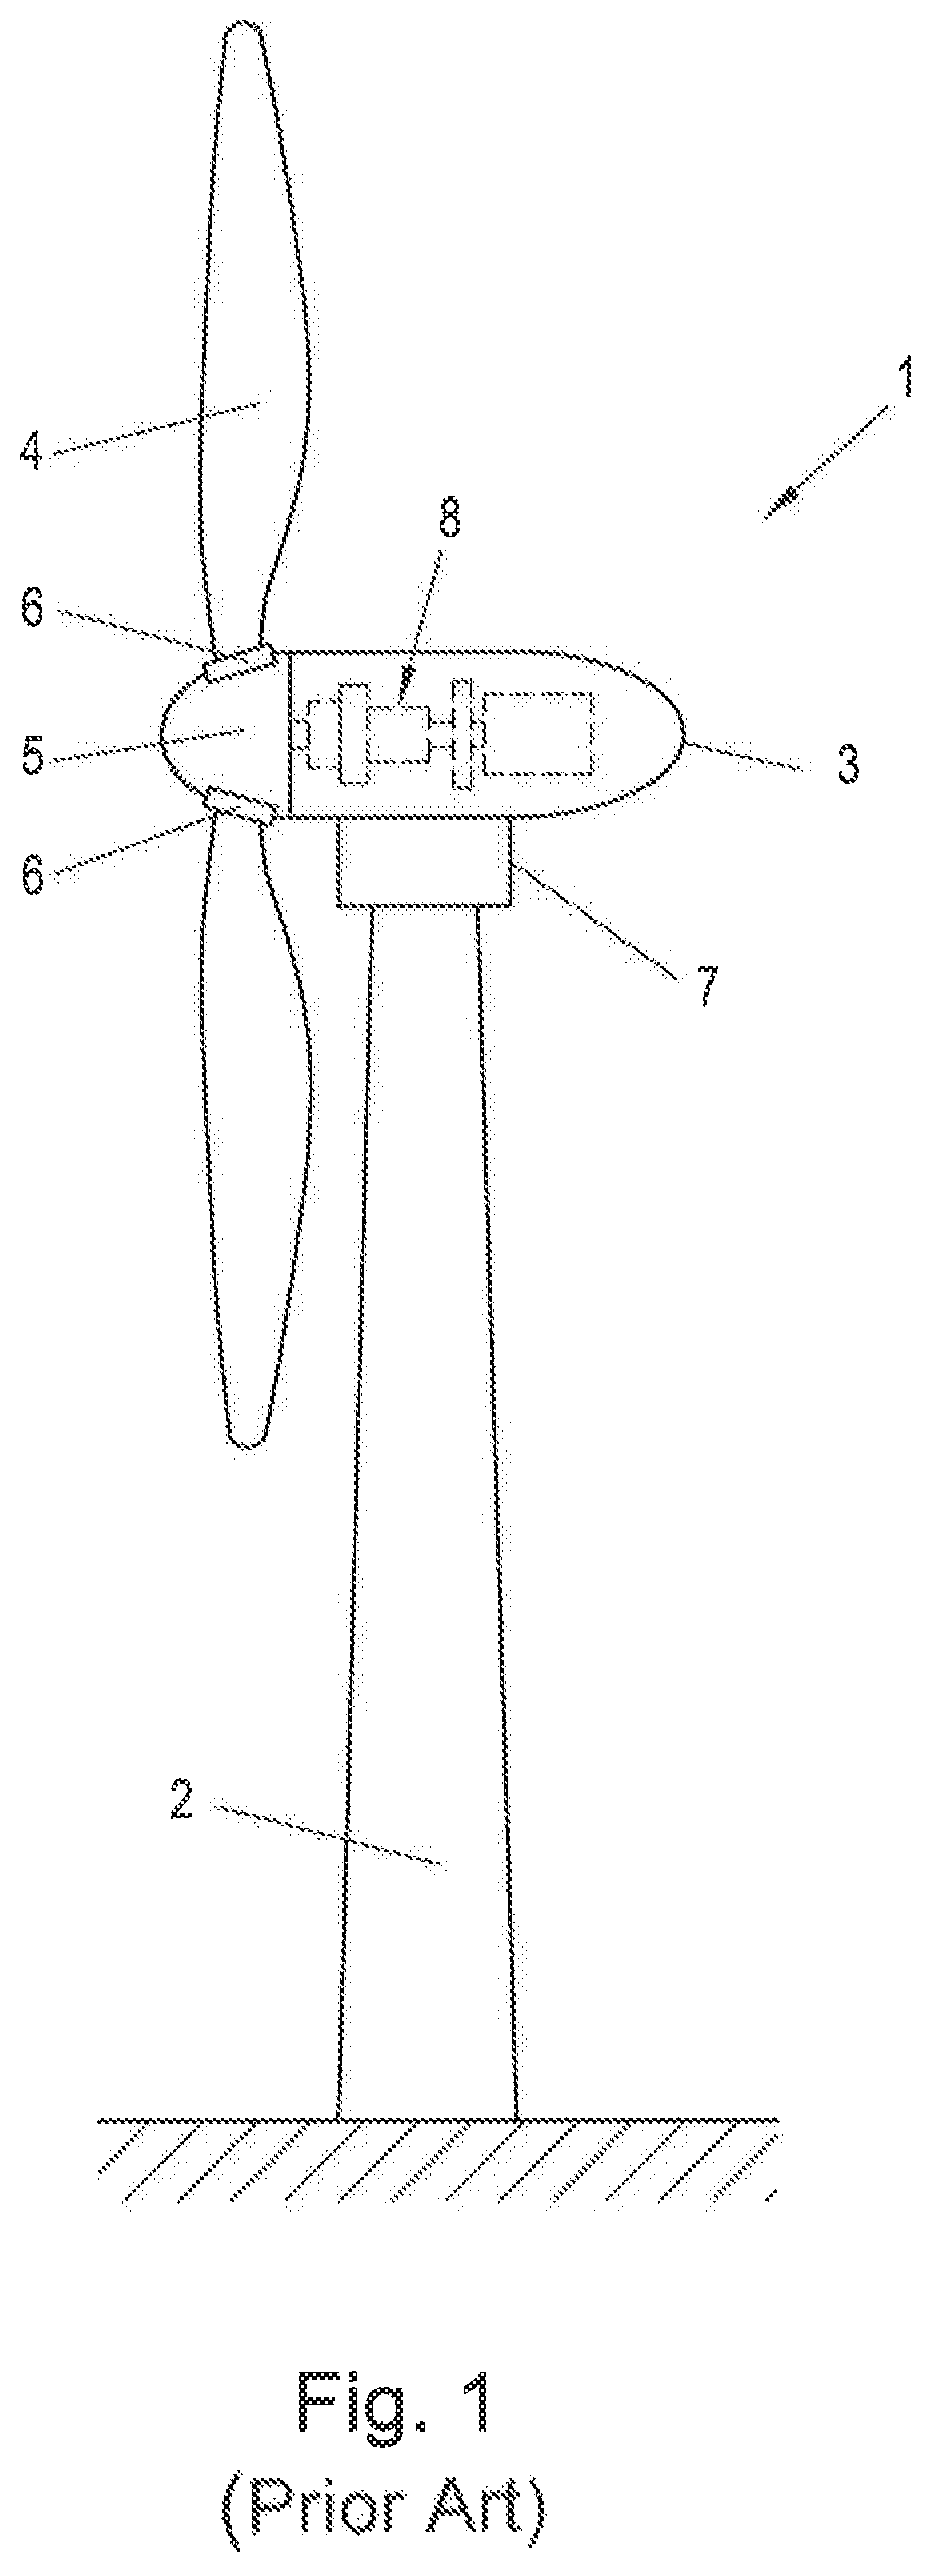 Method for adjusting an adjustment device of a wind power plant